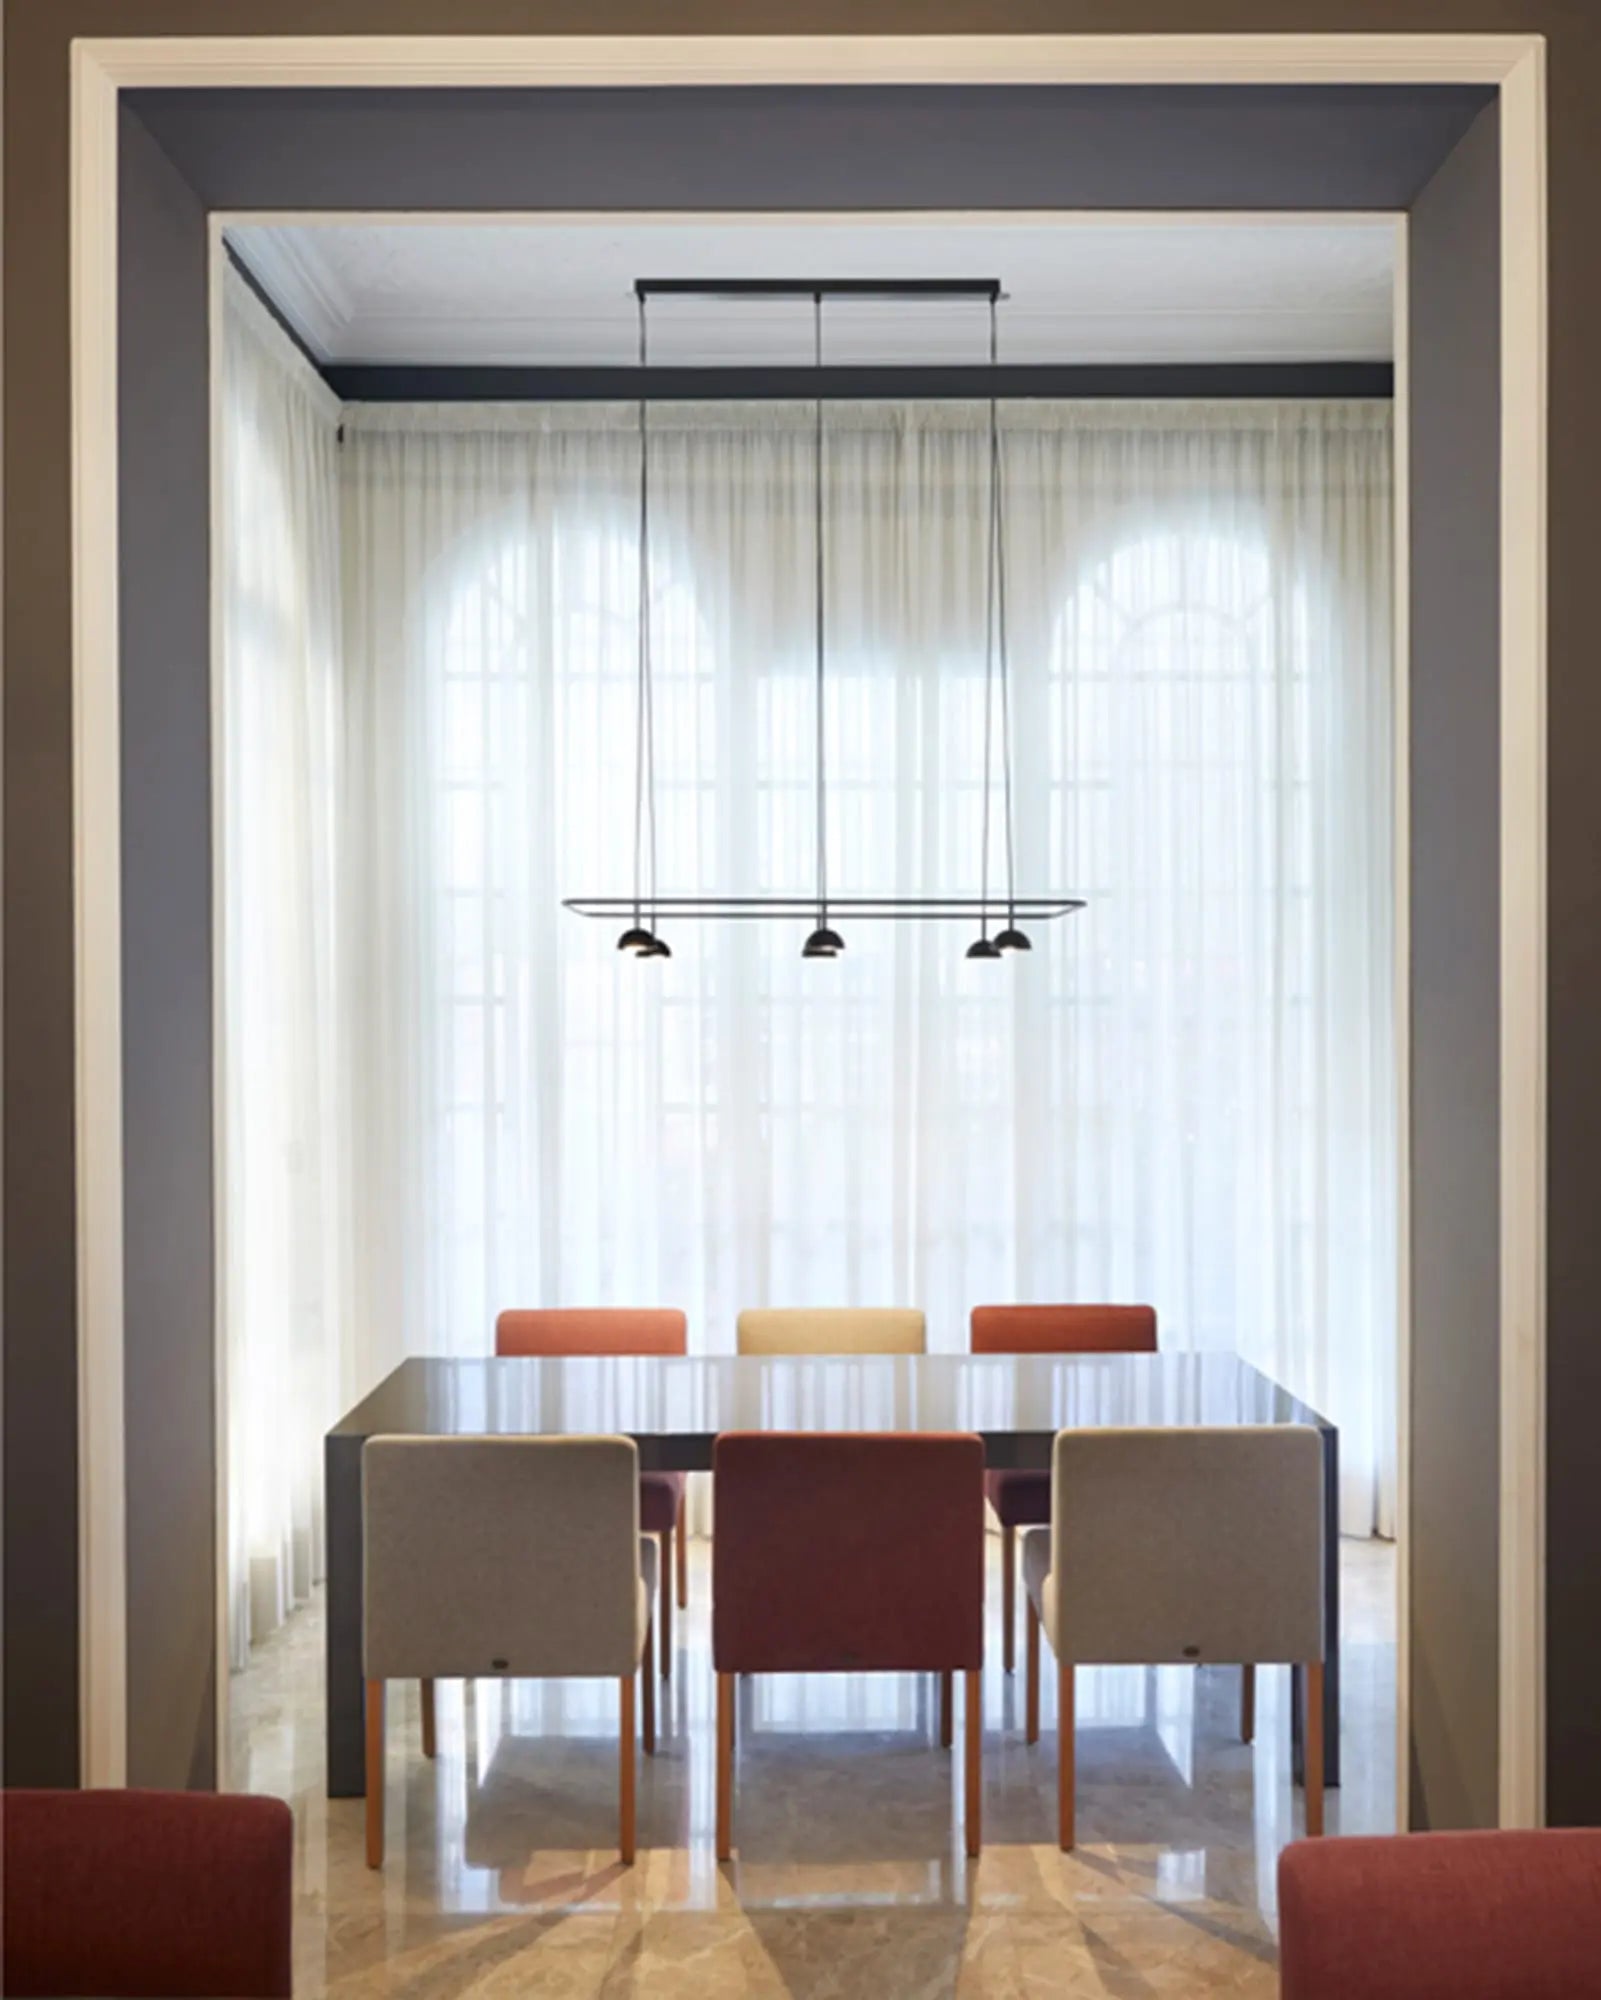 Cupolina 6 Lights pendant above dining table